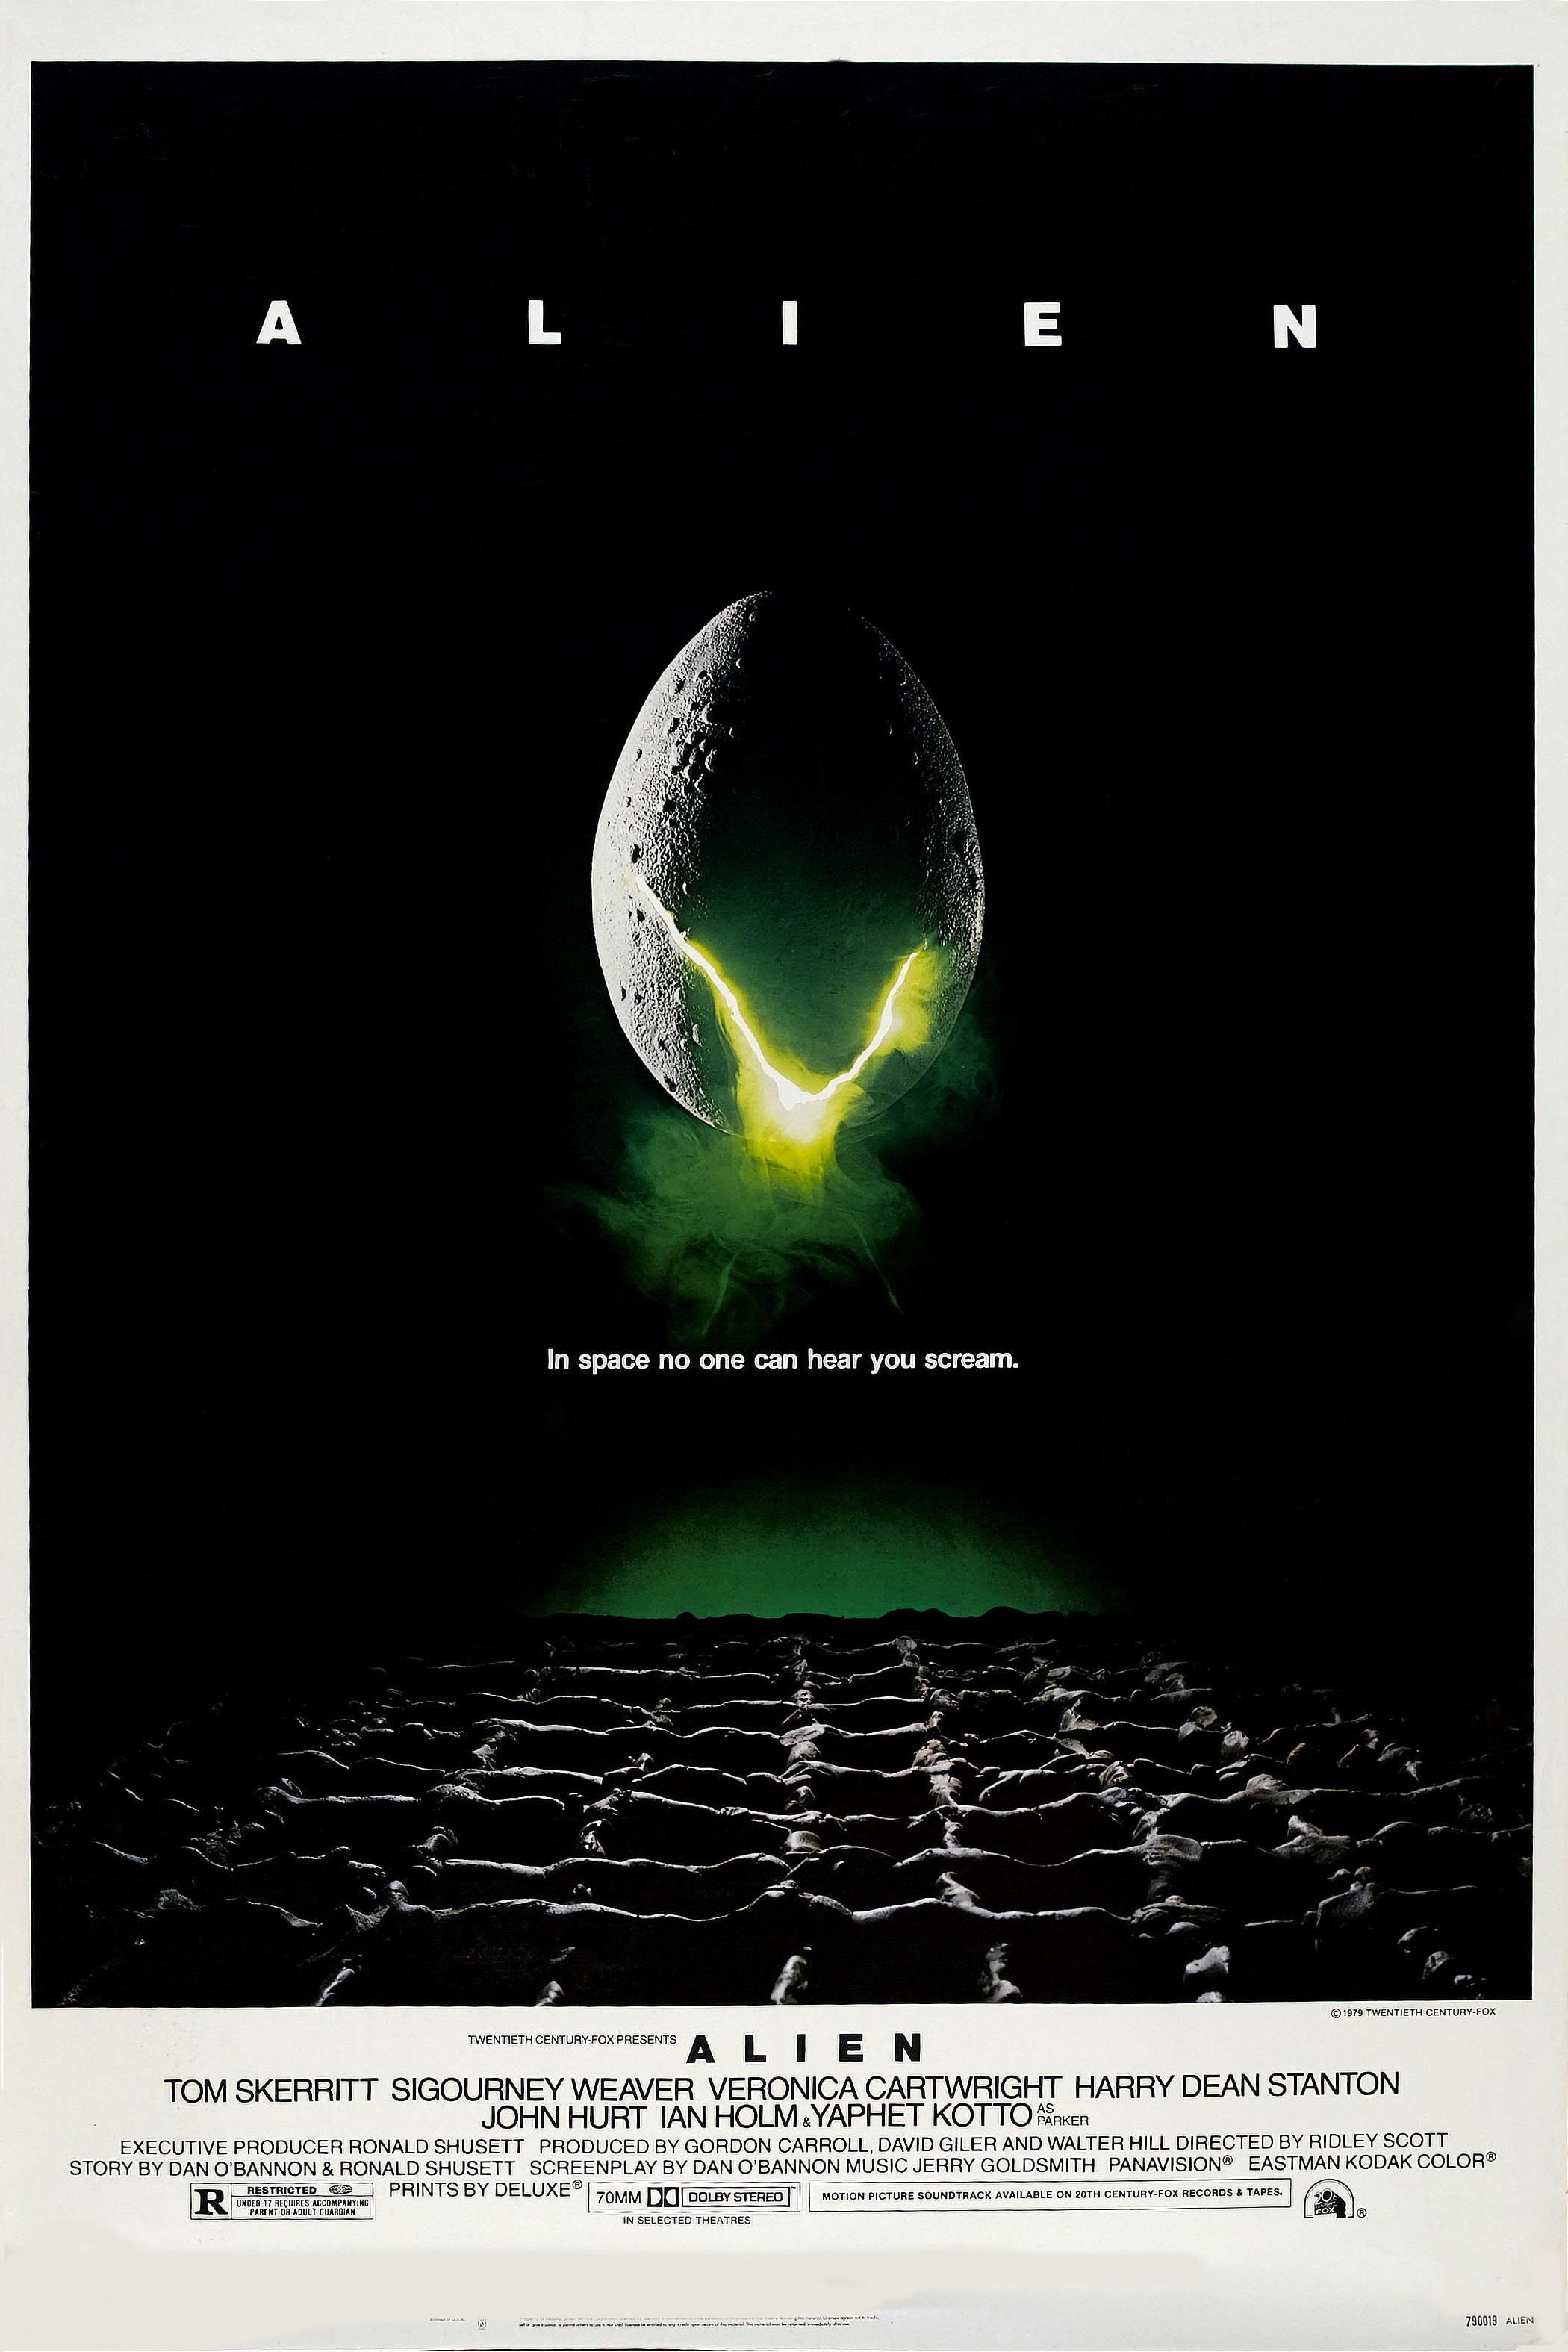 The theatrical poster of an alien egg in &quot;Alien&quot;